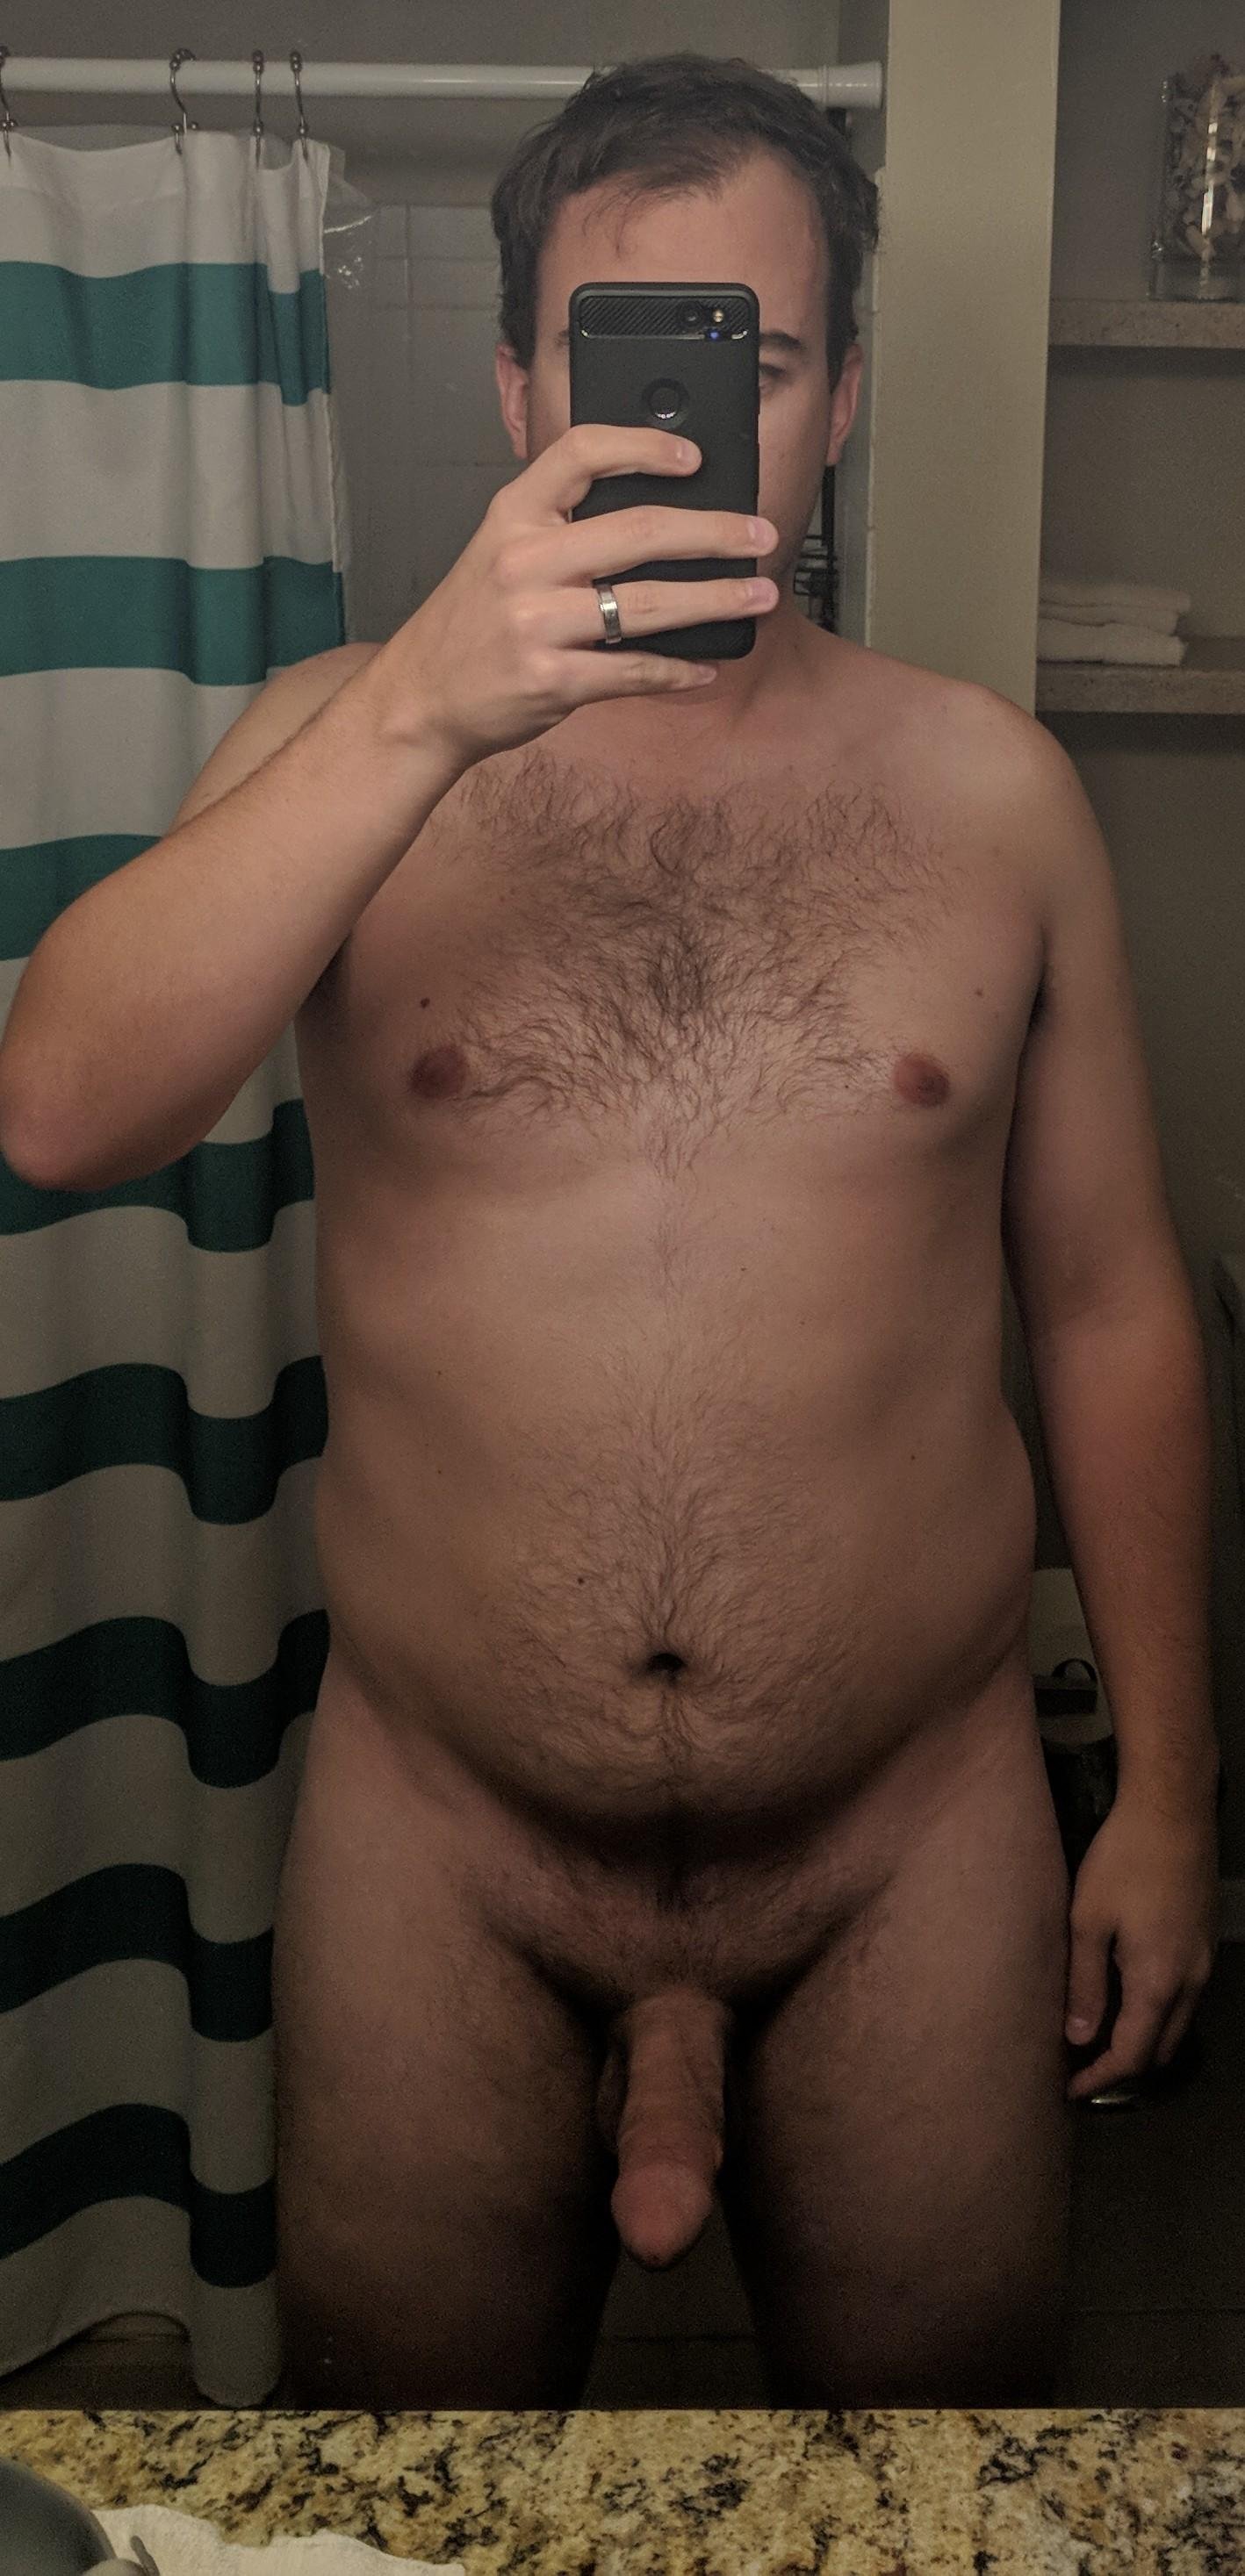 M 6'3" 235 trying to lose weight in midsection and hips. Hoping keto and a good program will get me there. This sub is a great motivator!